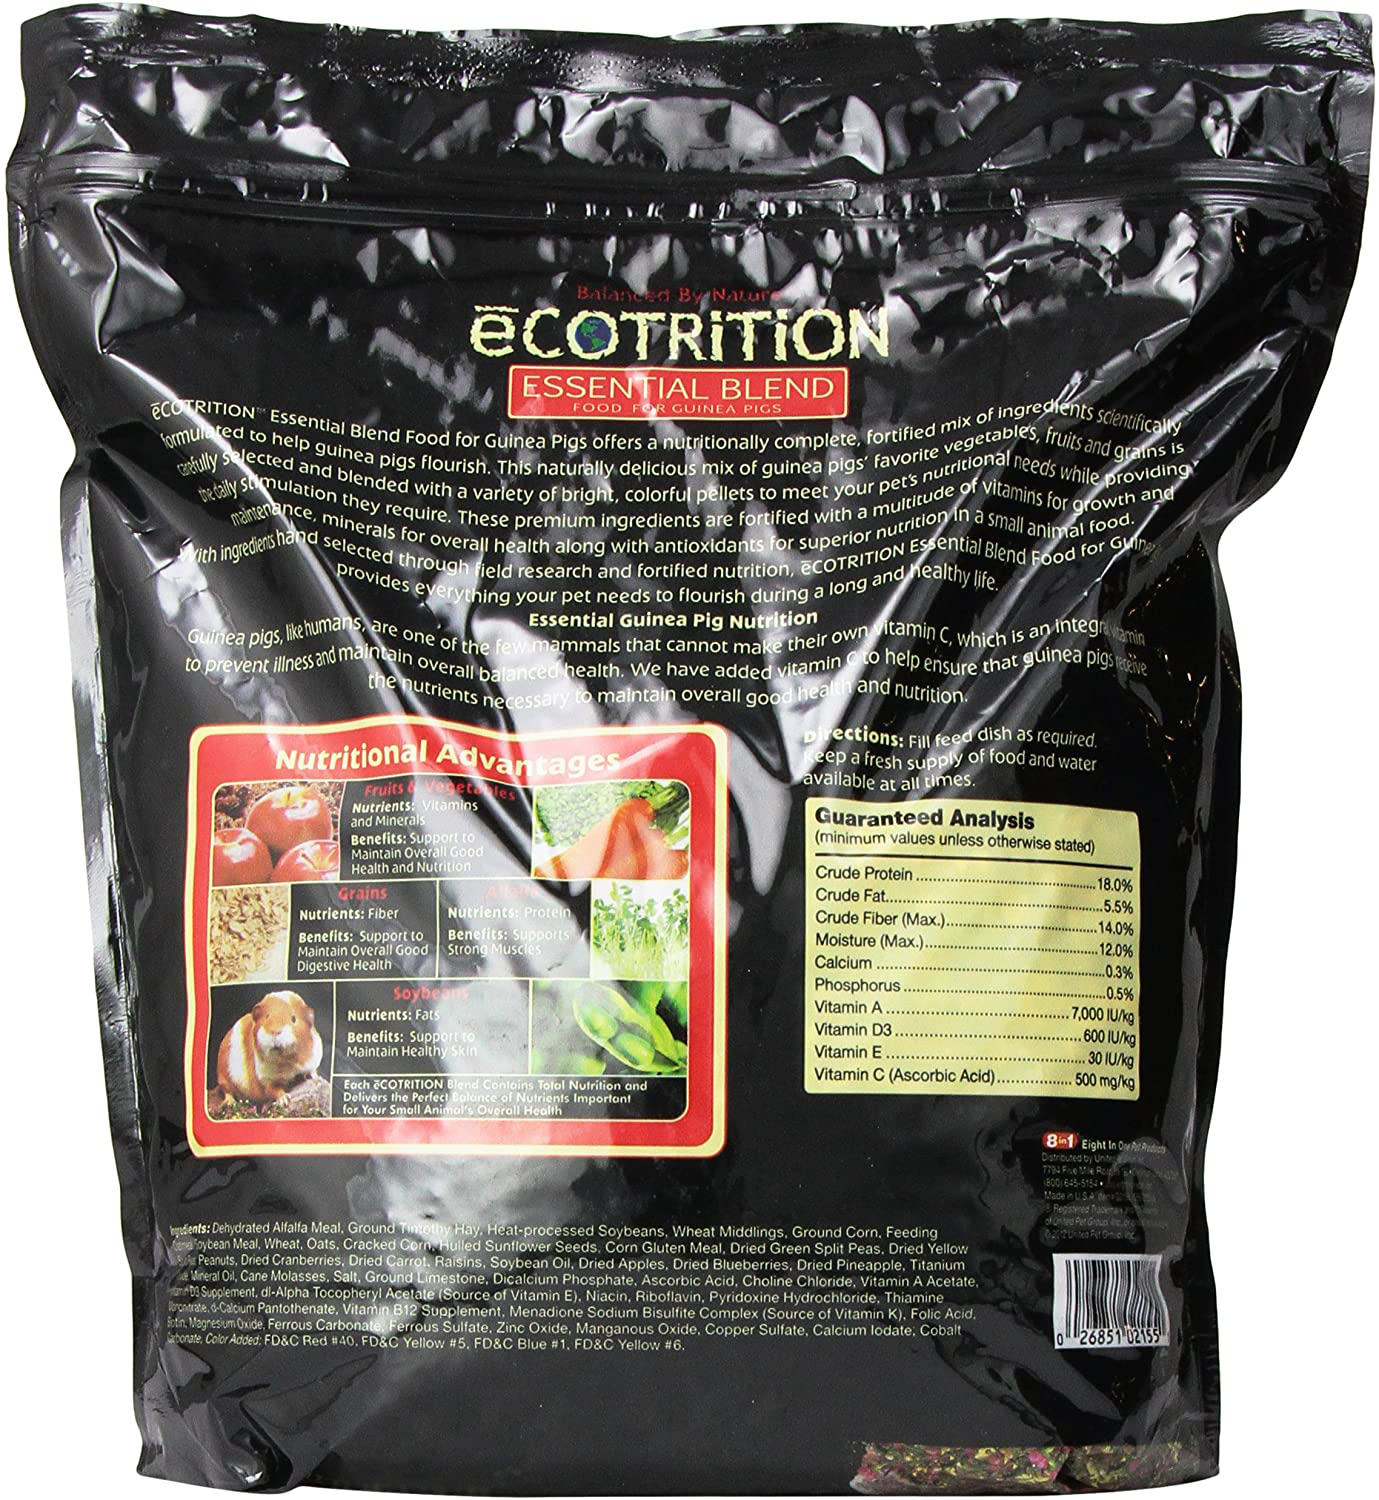 Ecotrition Essential Blend Food for Guinea Pigs